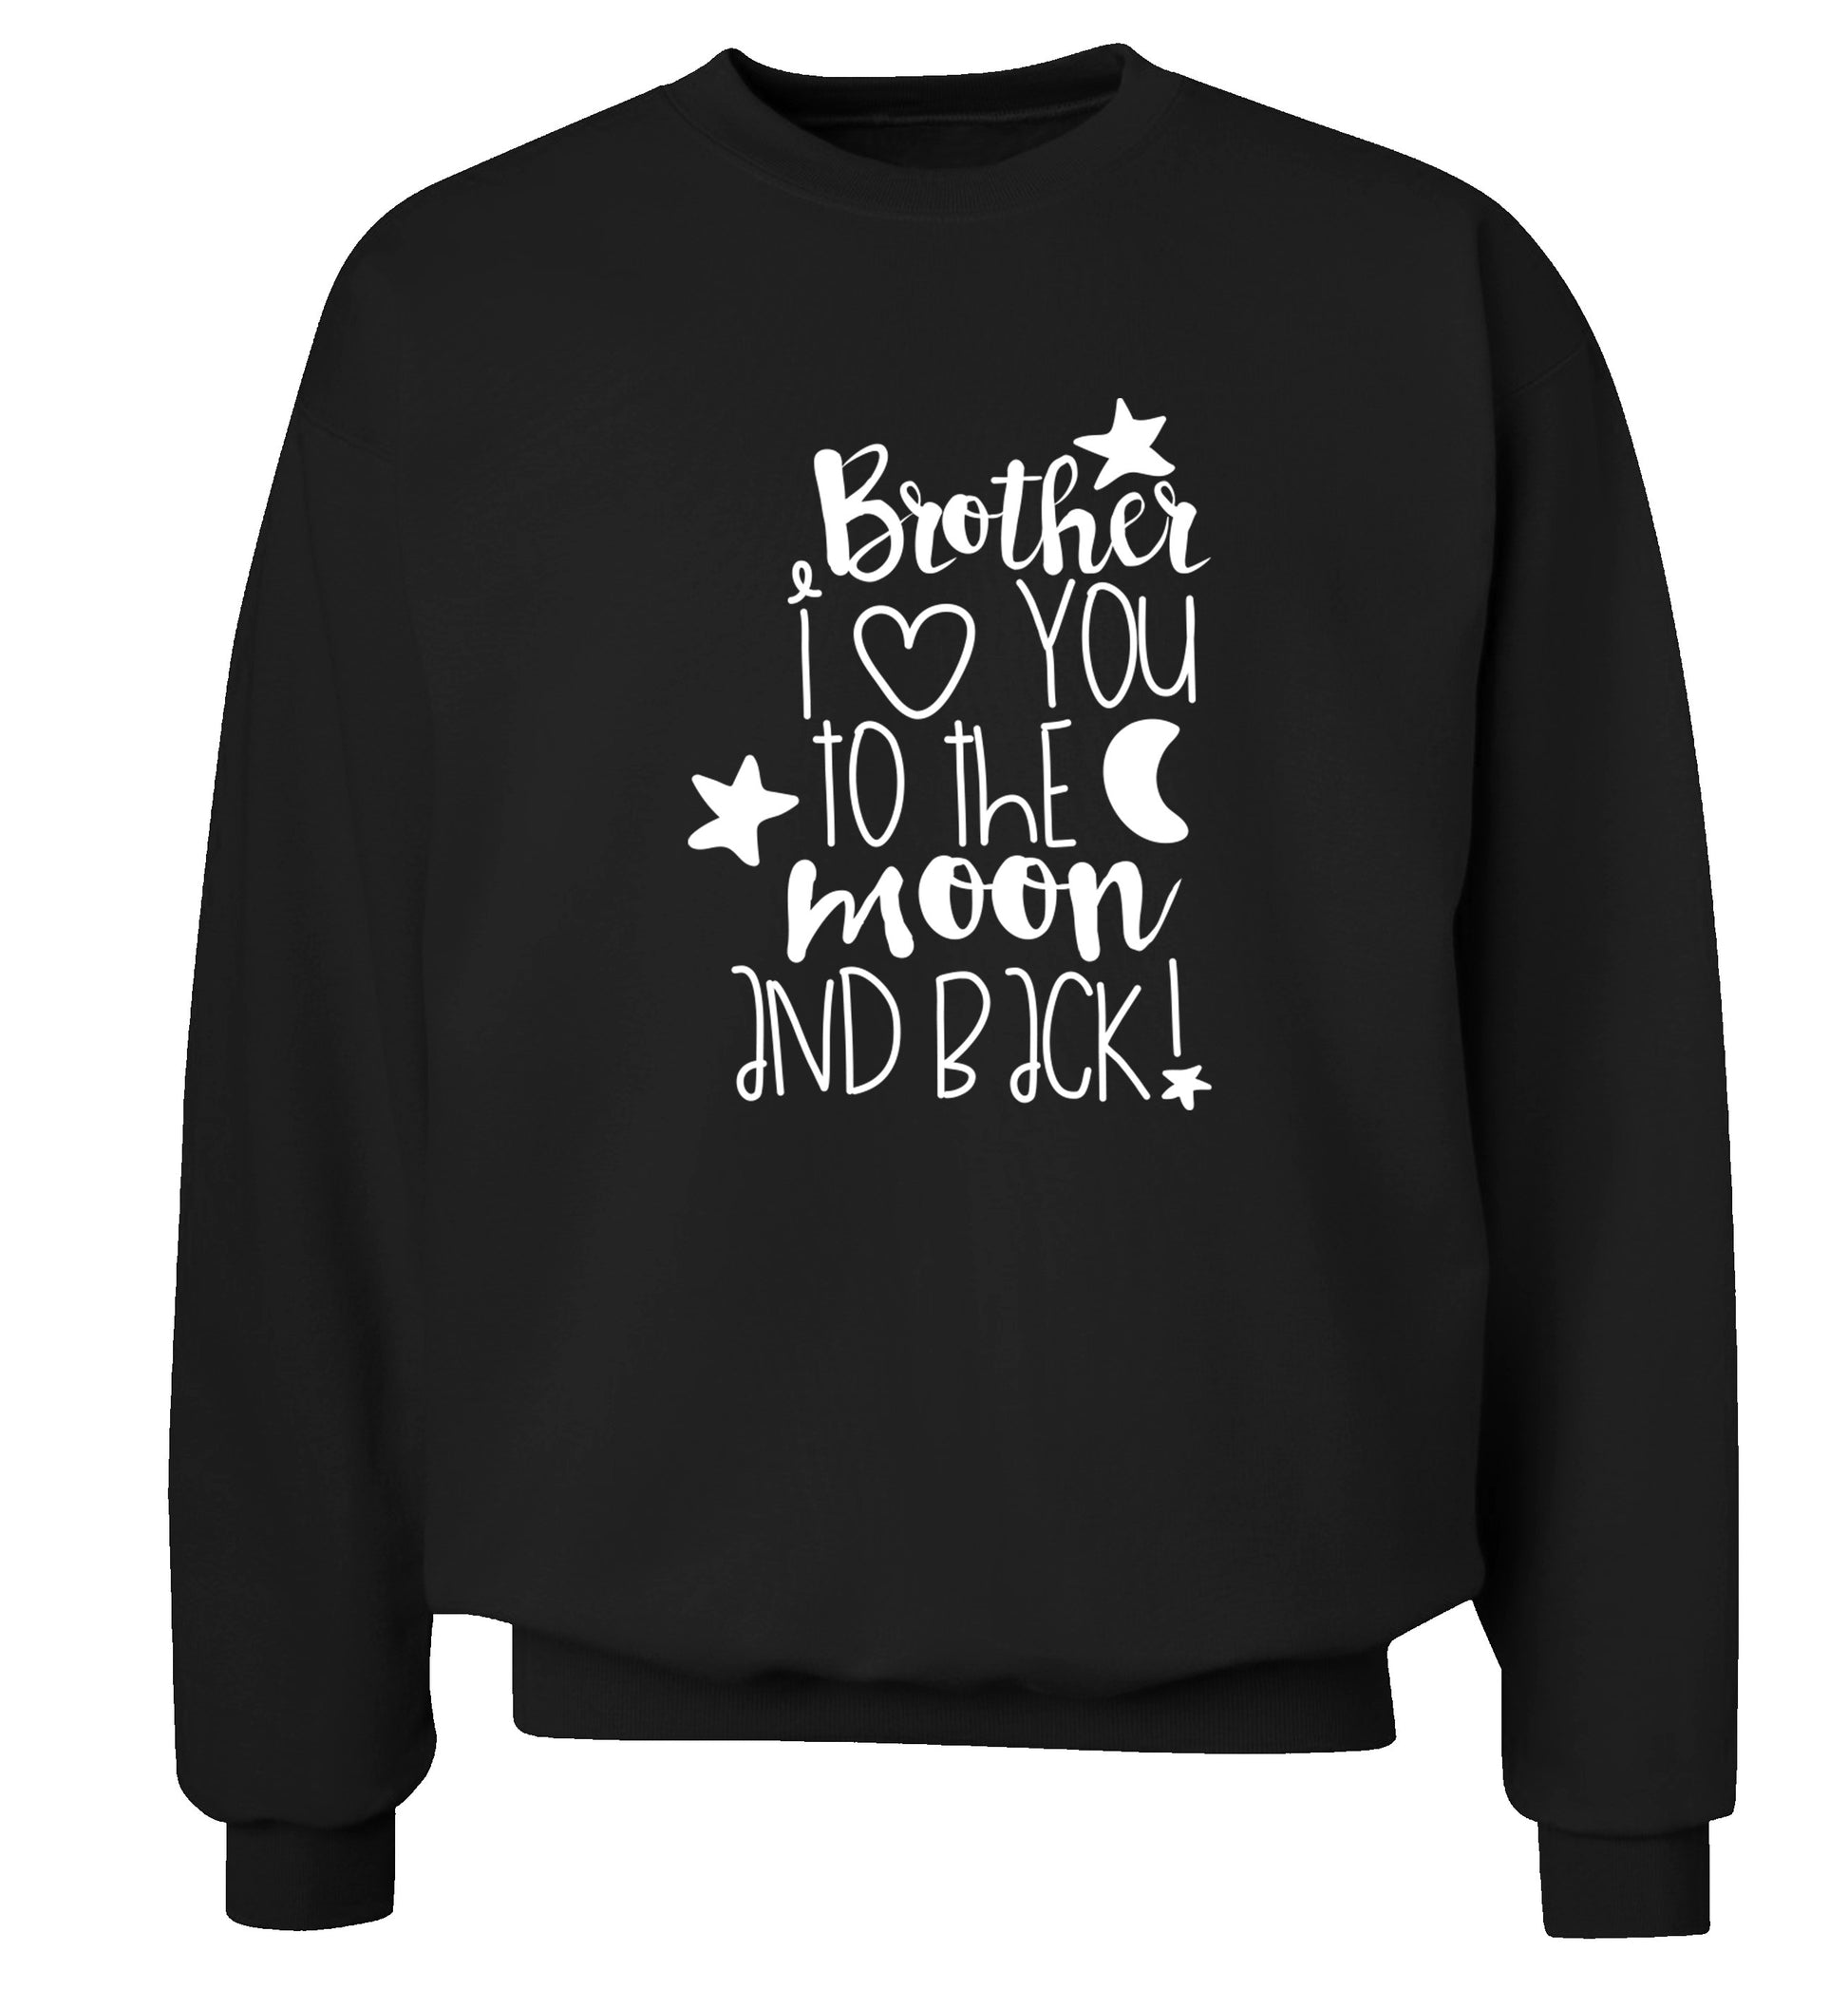 Brother I love you to the moon and back Adult's unisex black  sweater 2XL